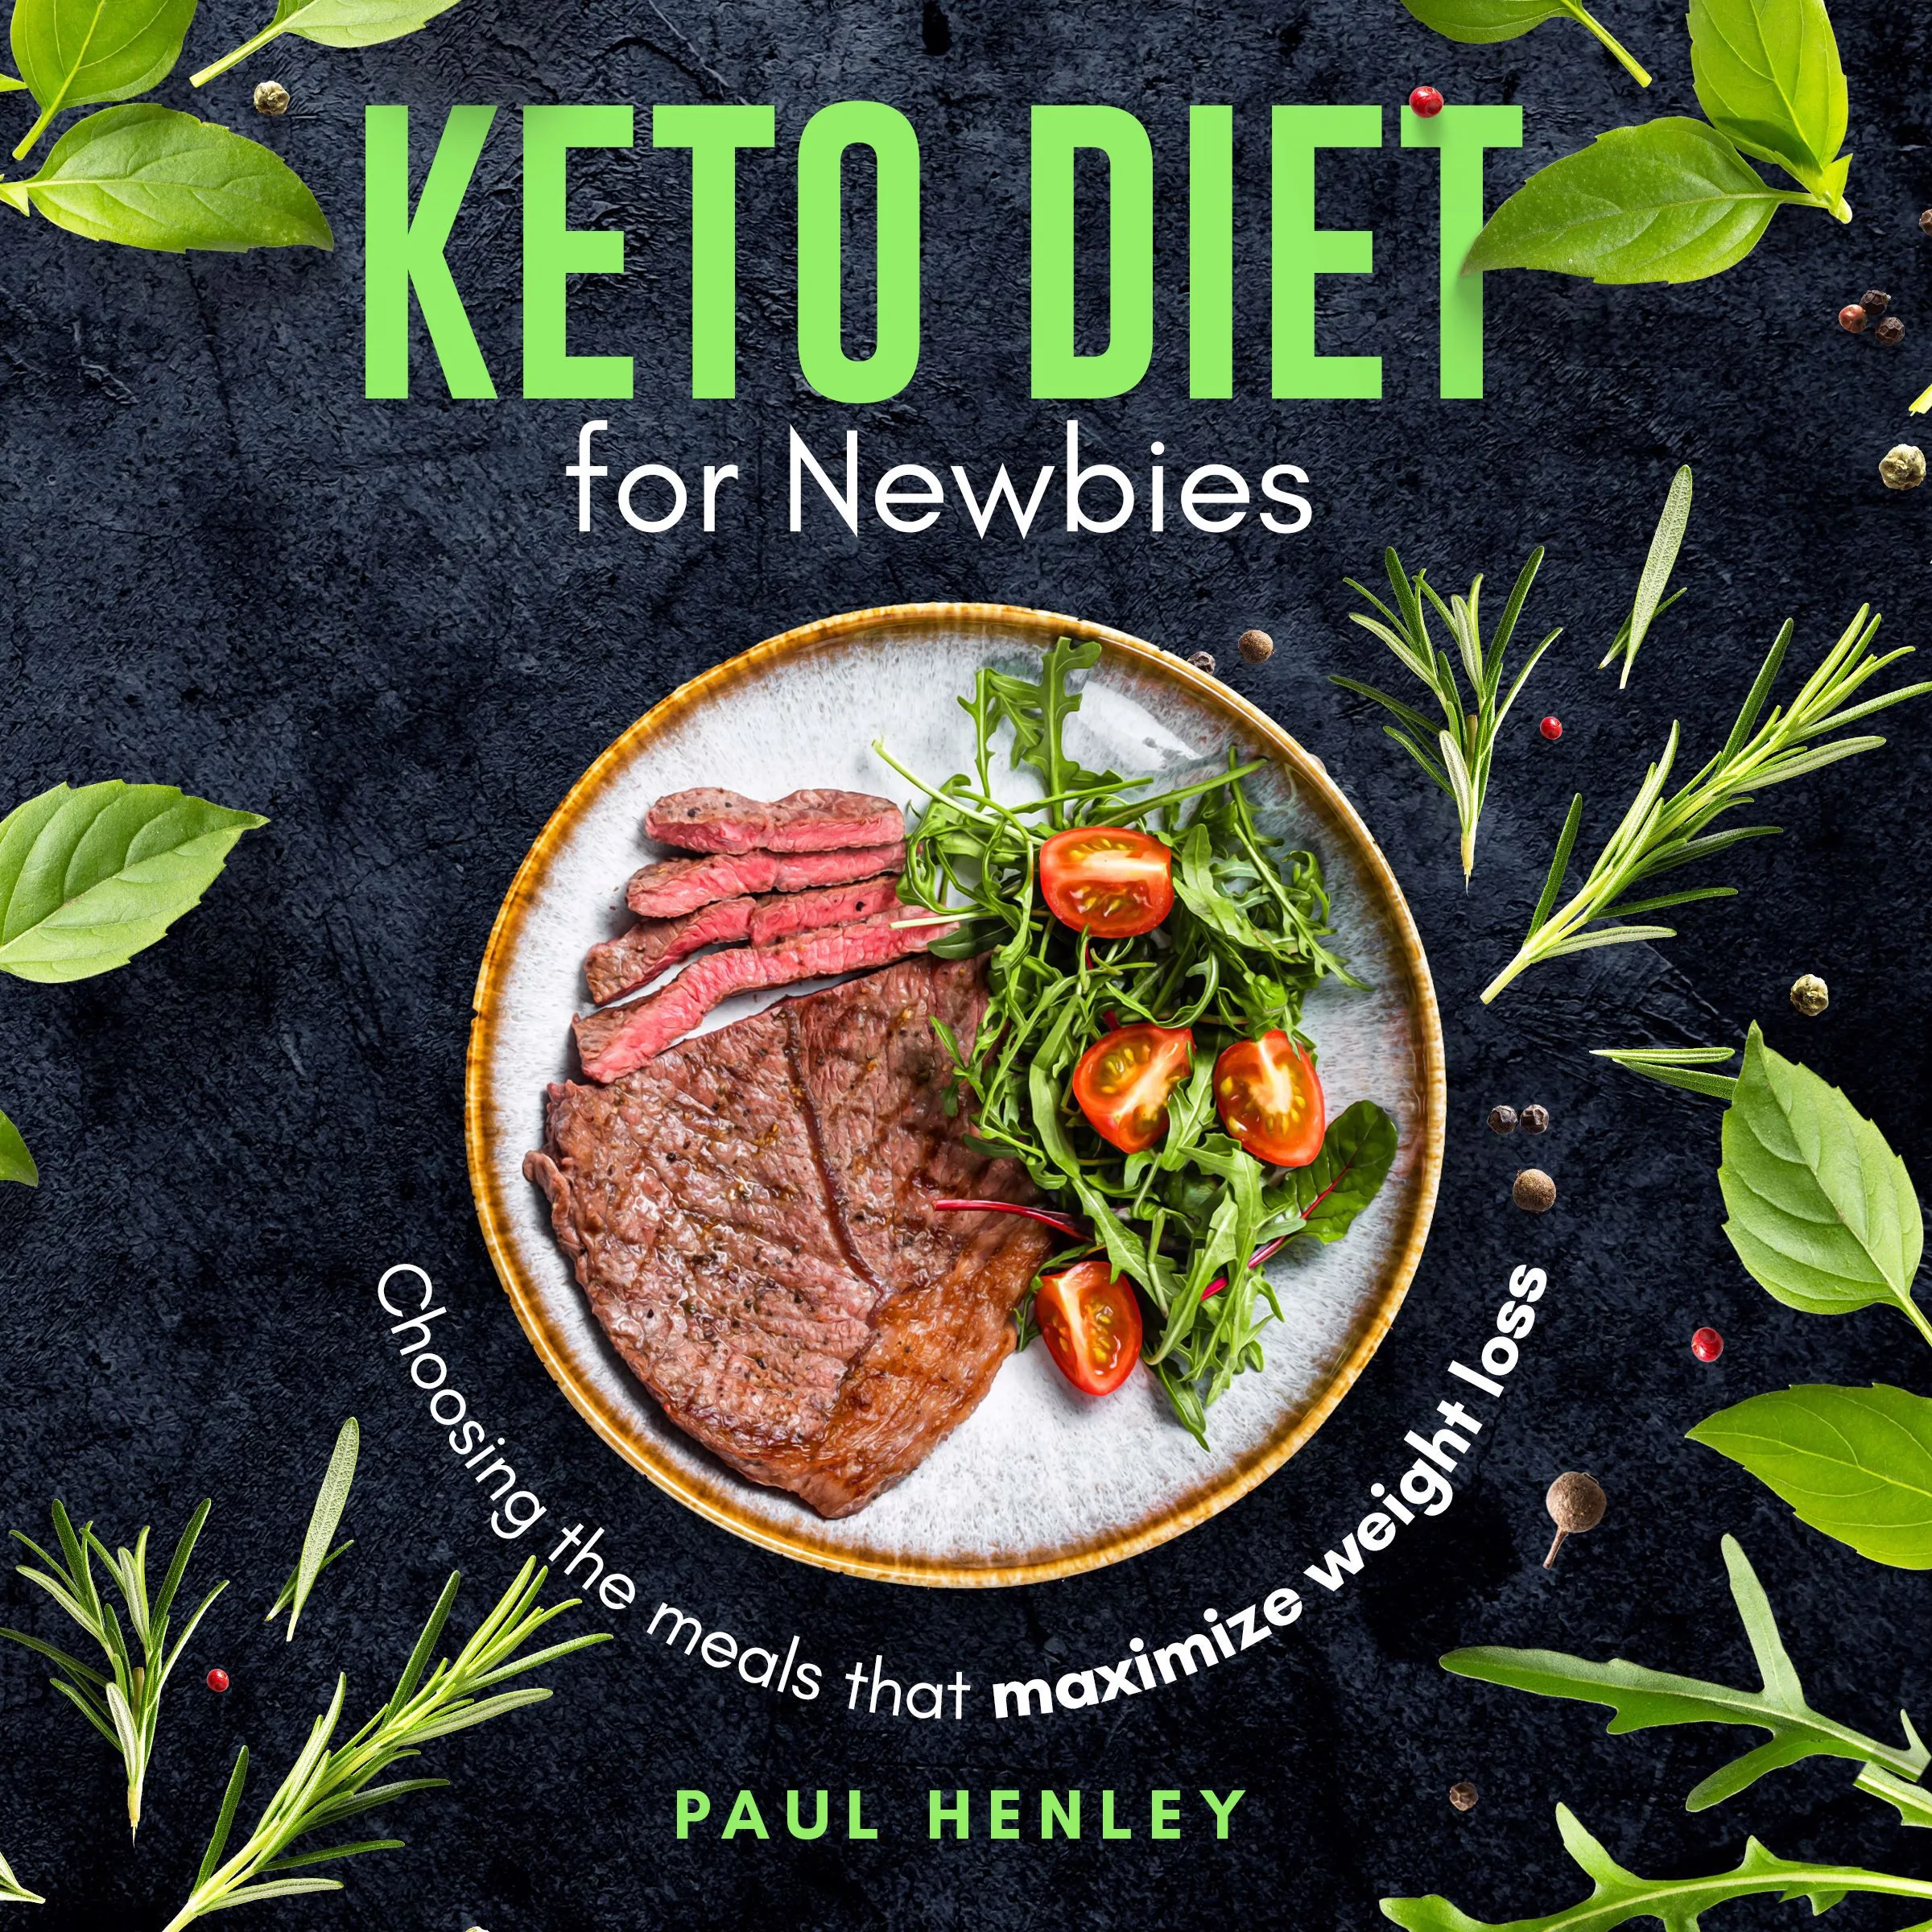 Keto Diet for Newbies by Paul Henley Audiobook